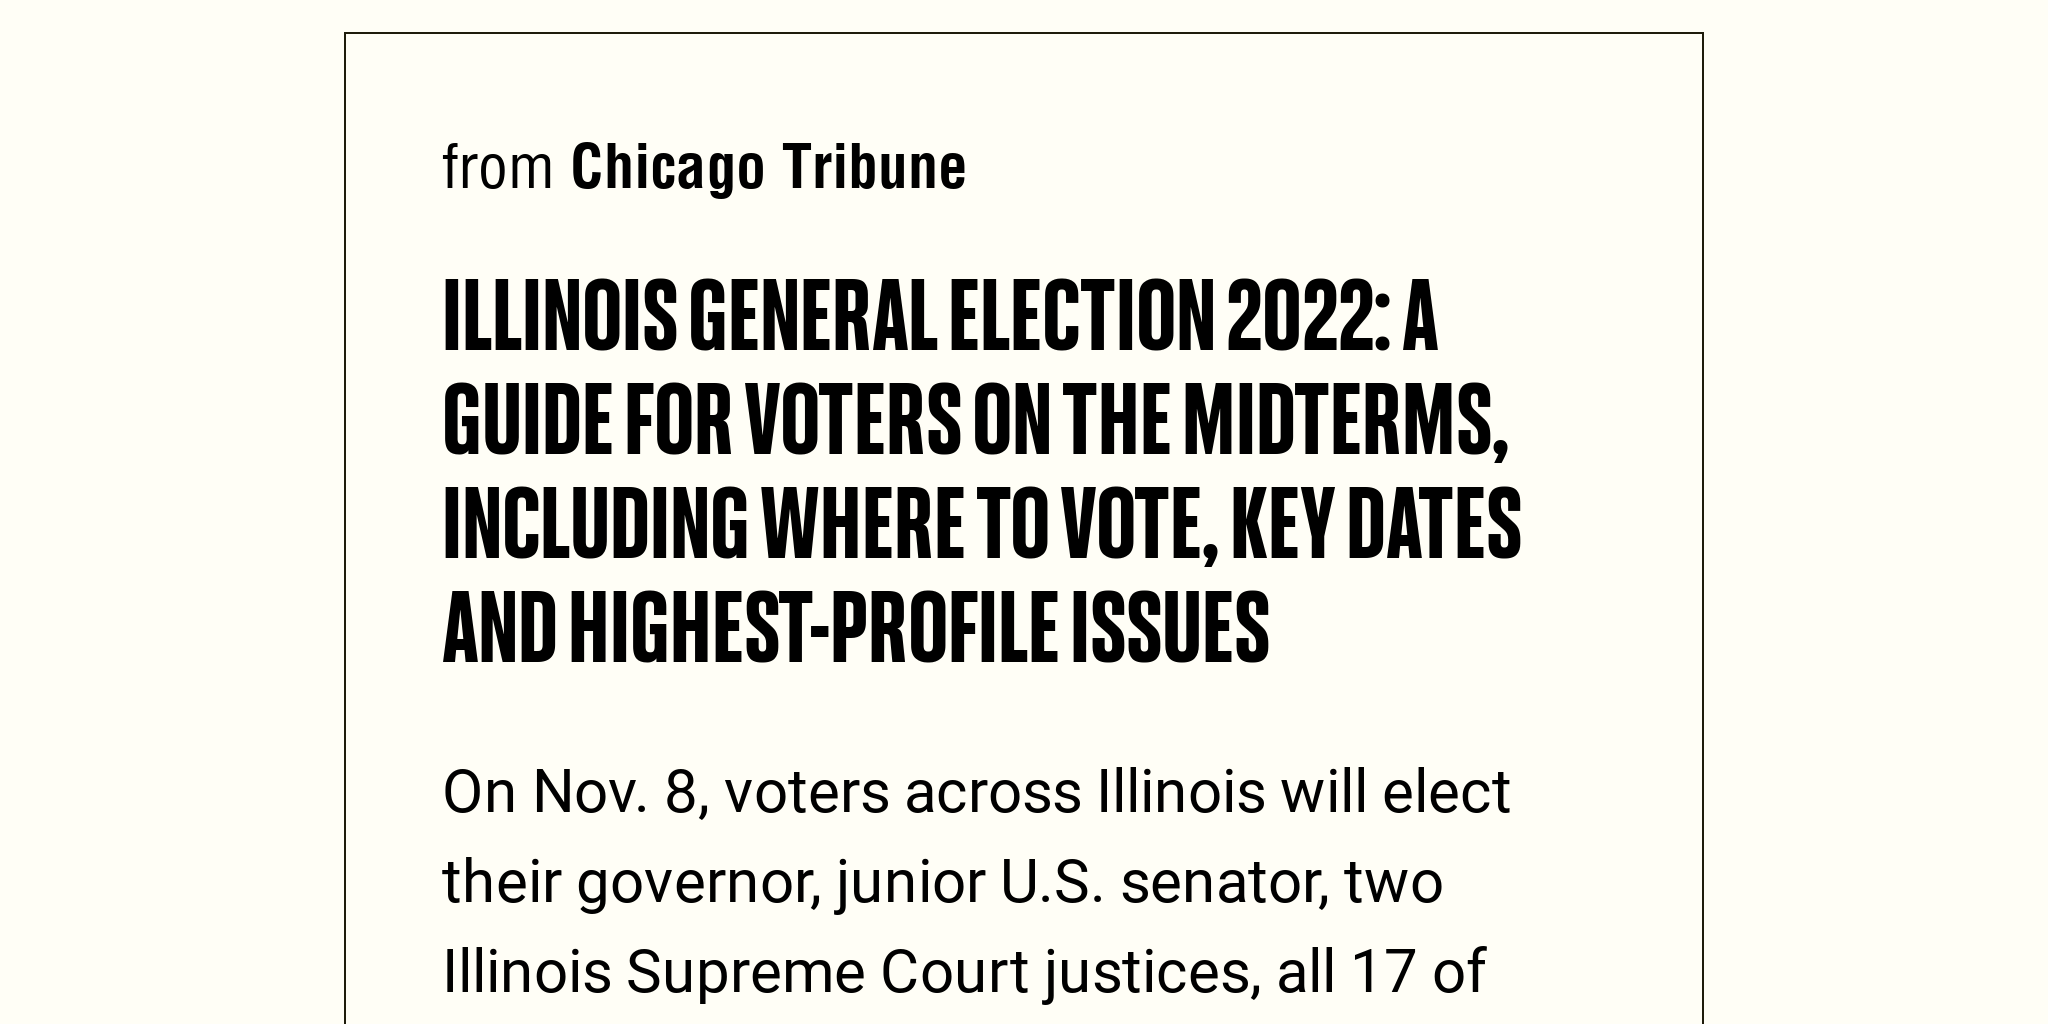 Illinois general election 2022 A guide for voters on the midterms